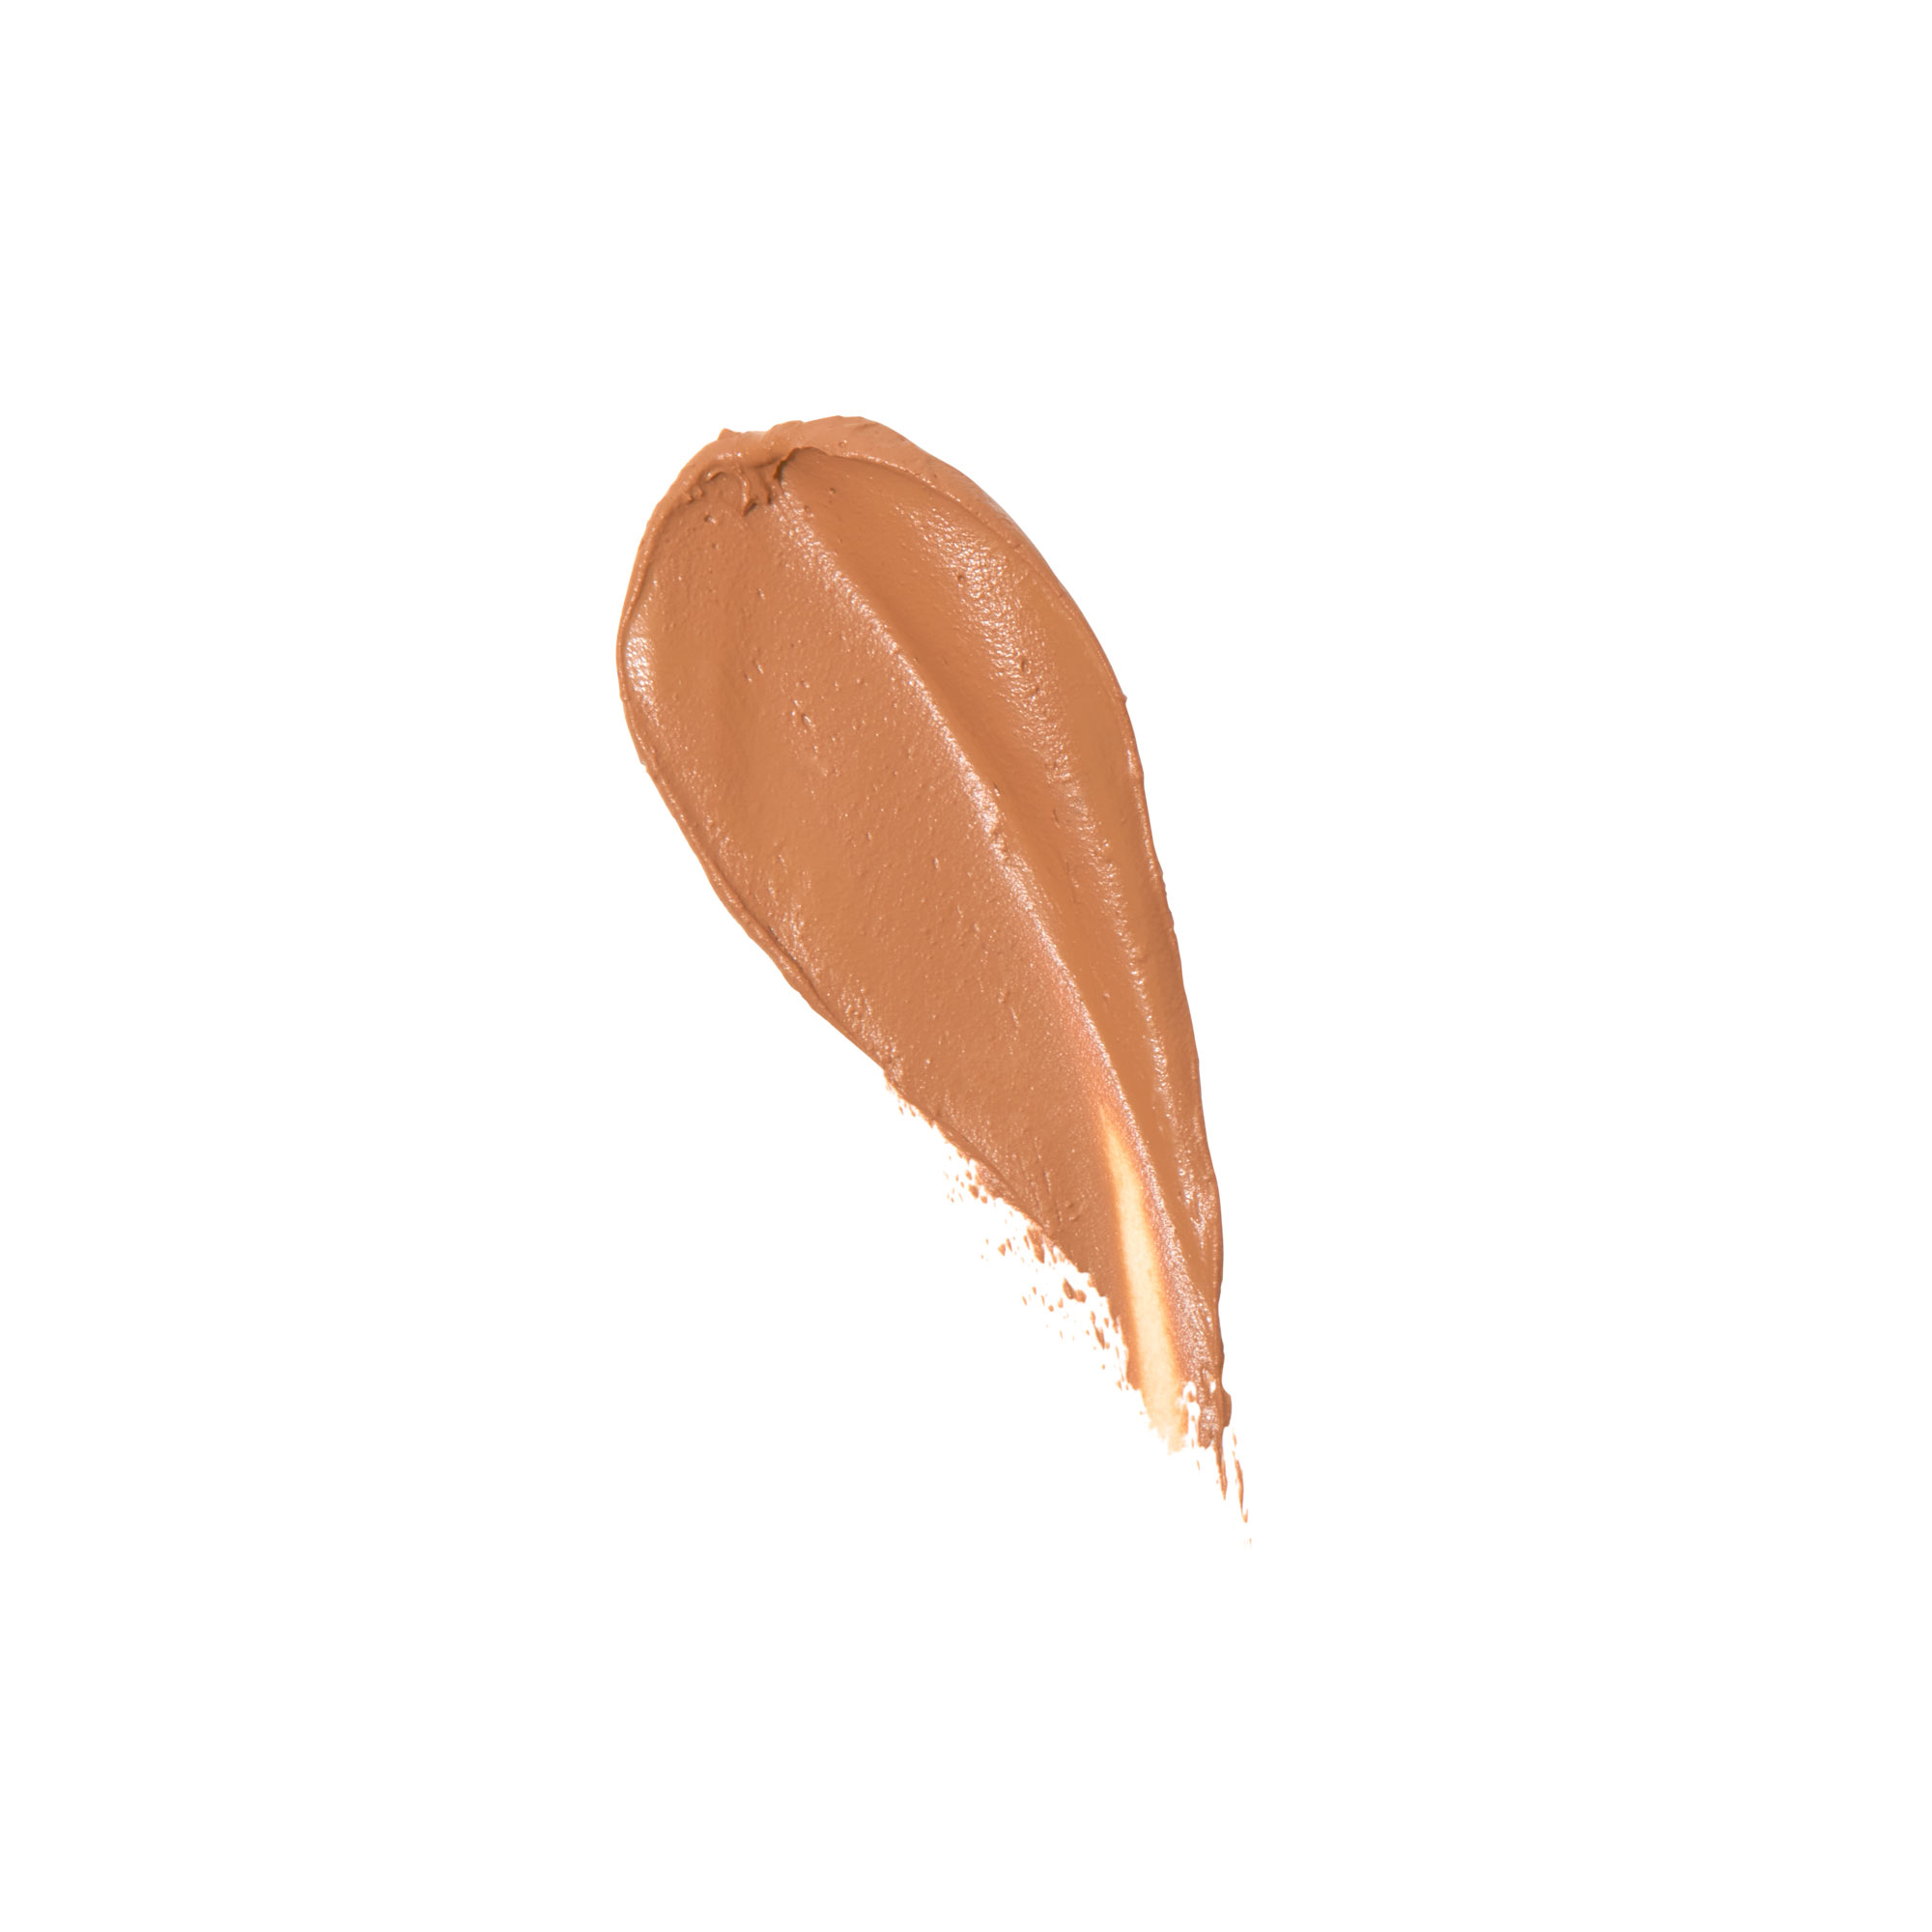 Benefit Cosmetics Boi-ing Industrial Strength Concealer, in Colour: 04 Medium-Tan Warm, Size: 3.0g